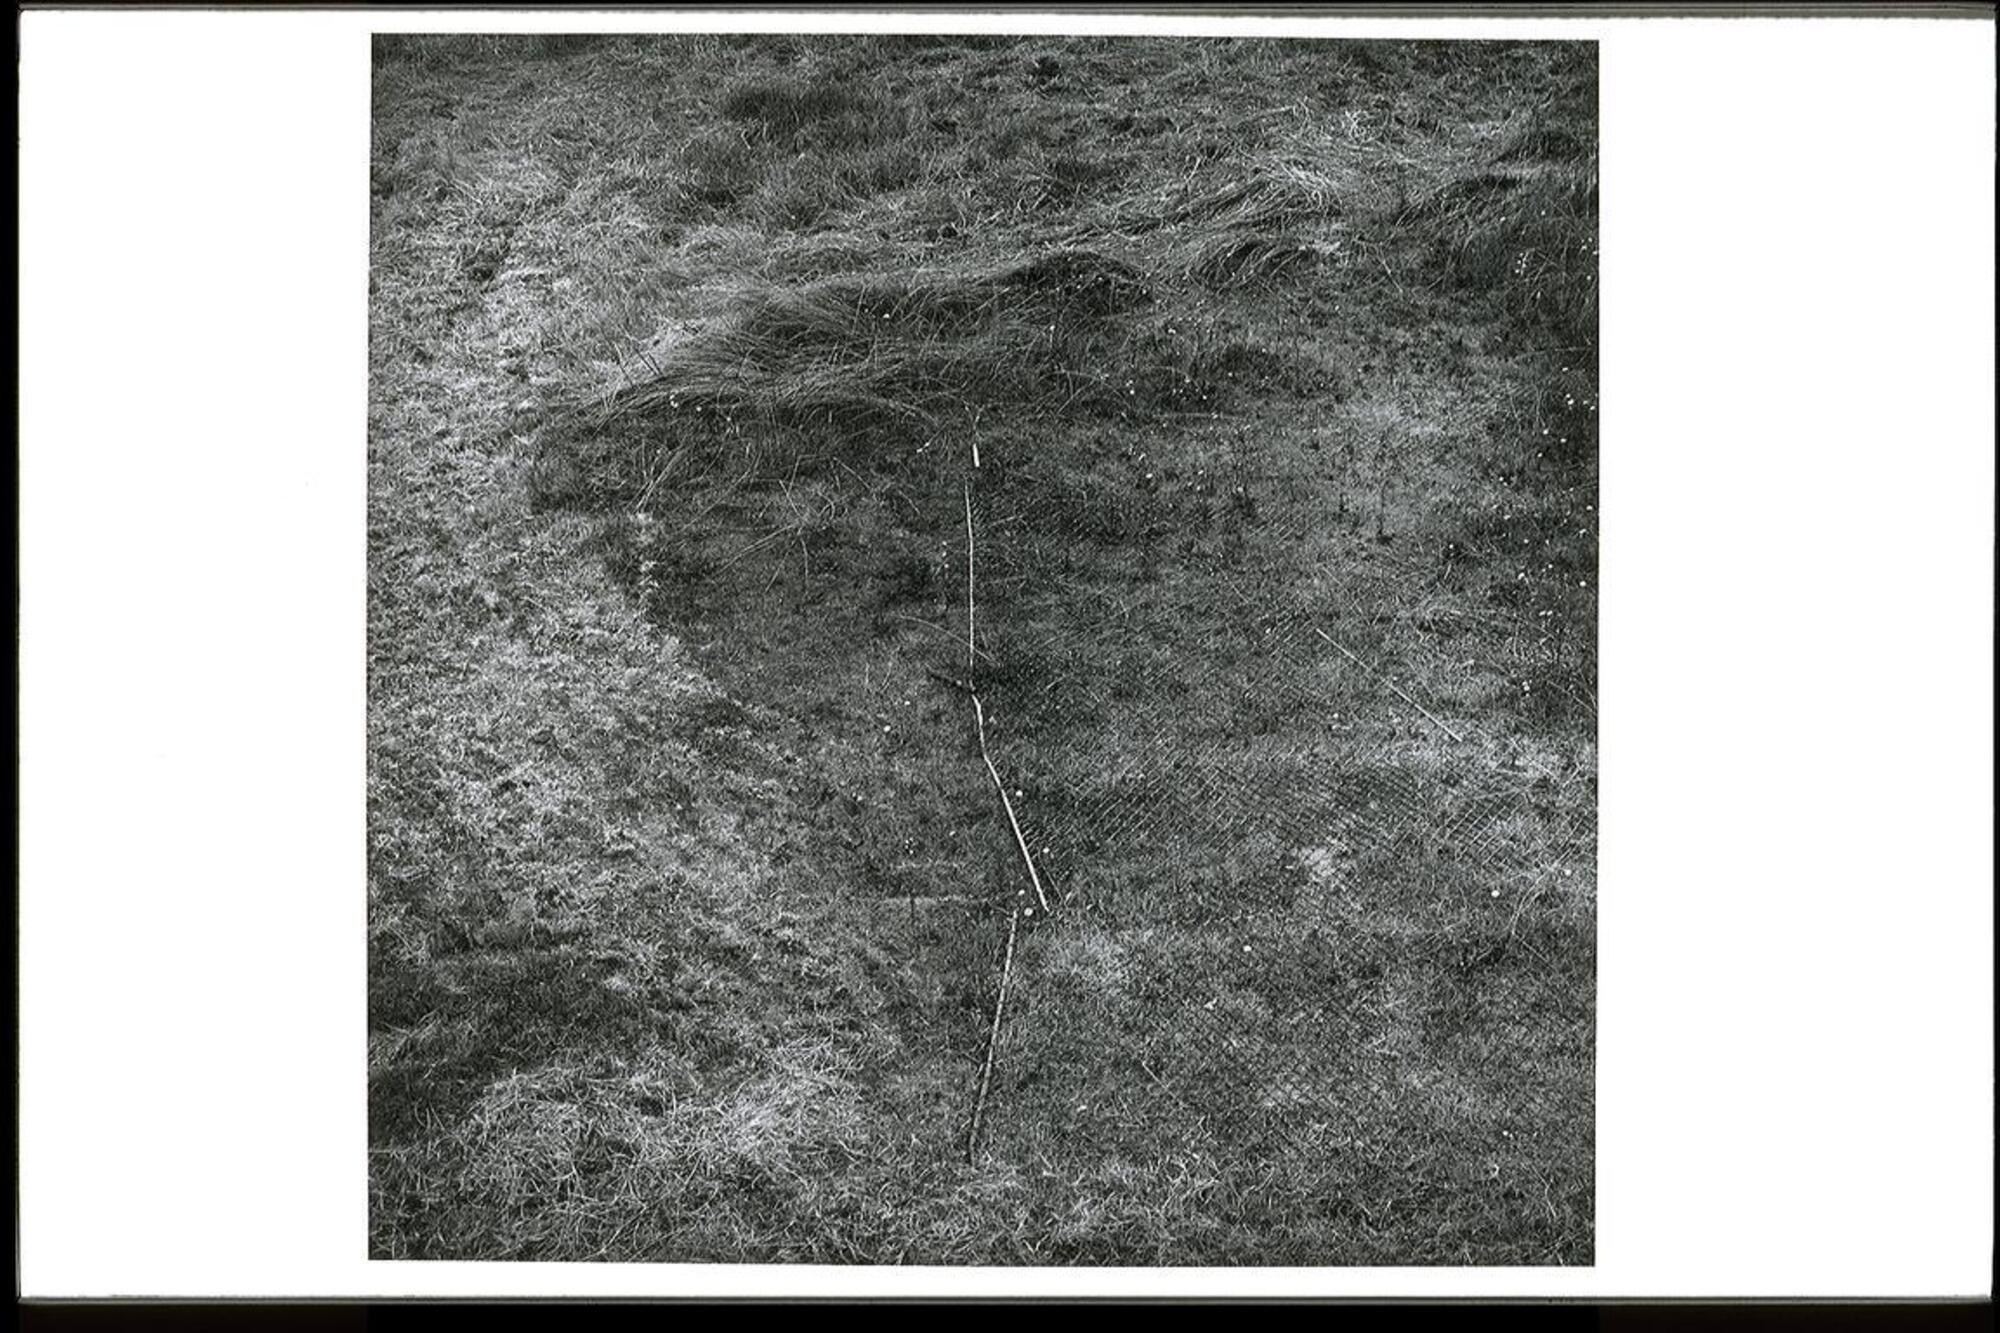 This is a black and white photograph depicting a close up view of a grass covered hillside. One portion of the hill has been covered with metal chain link fencing, laid flat on the ground, to prevent the topsoil from sliding down the slope.